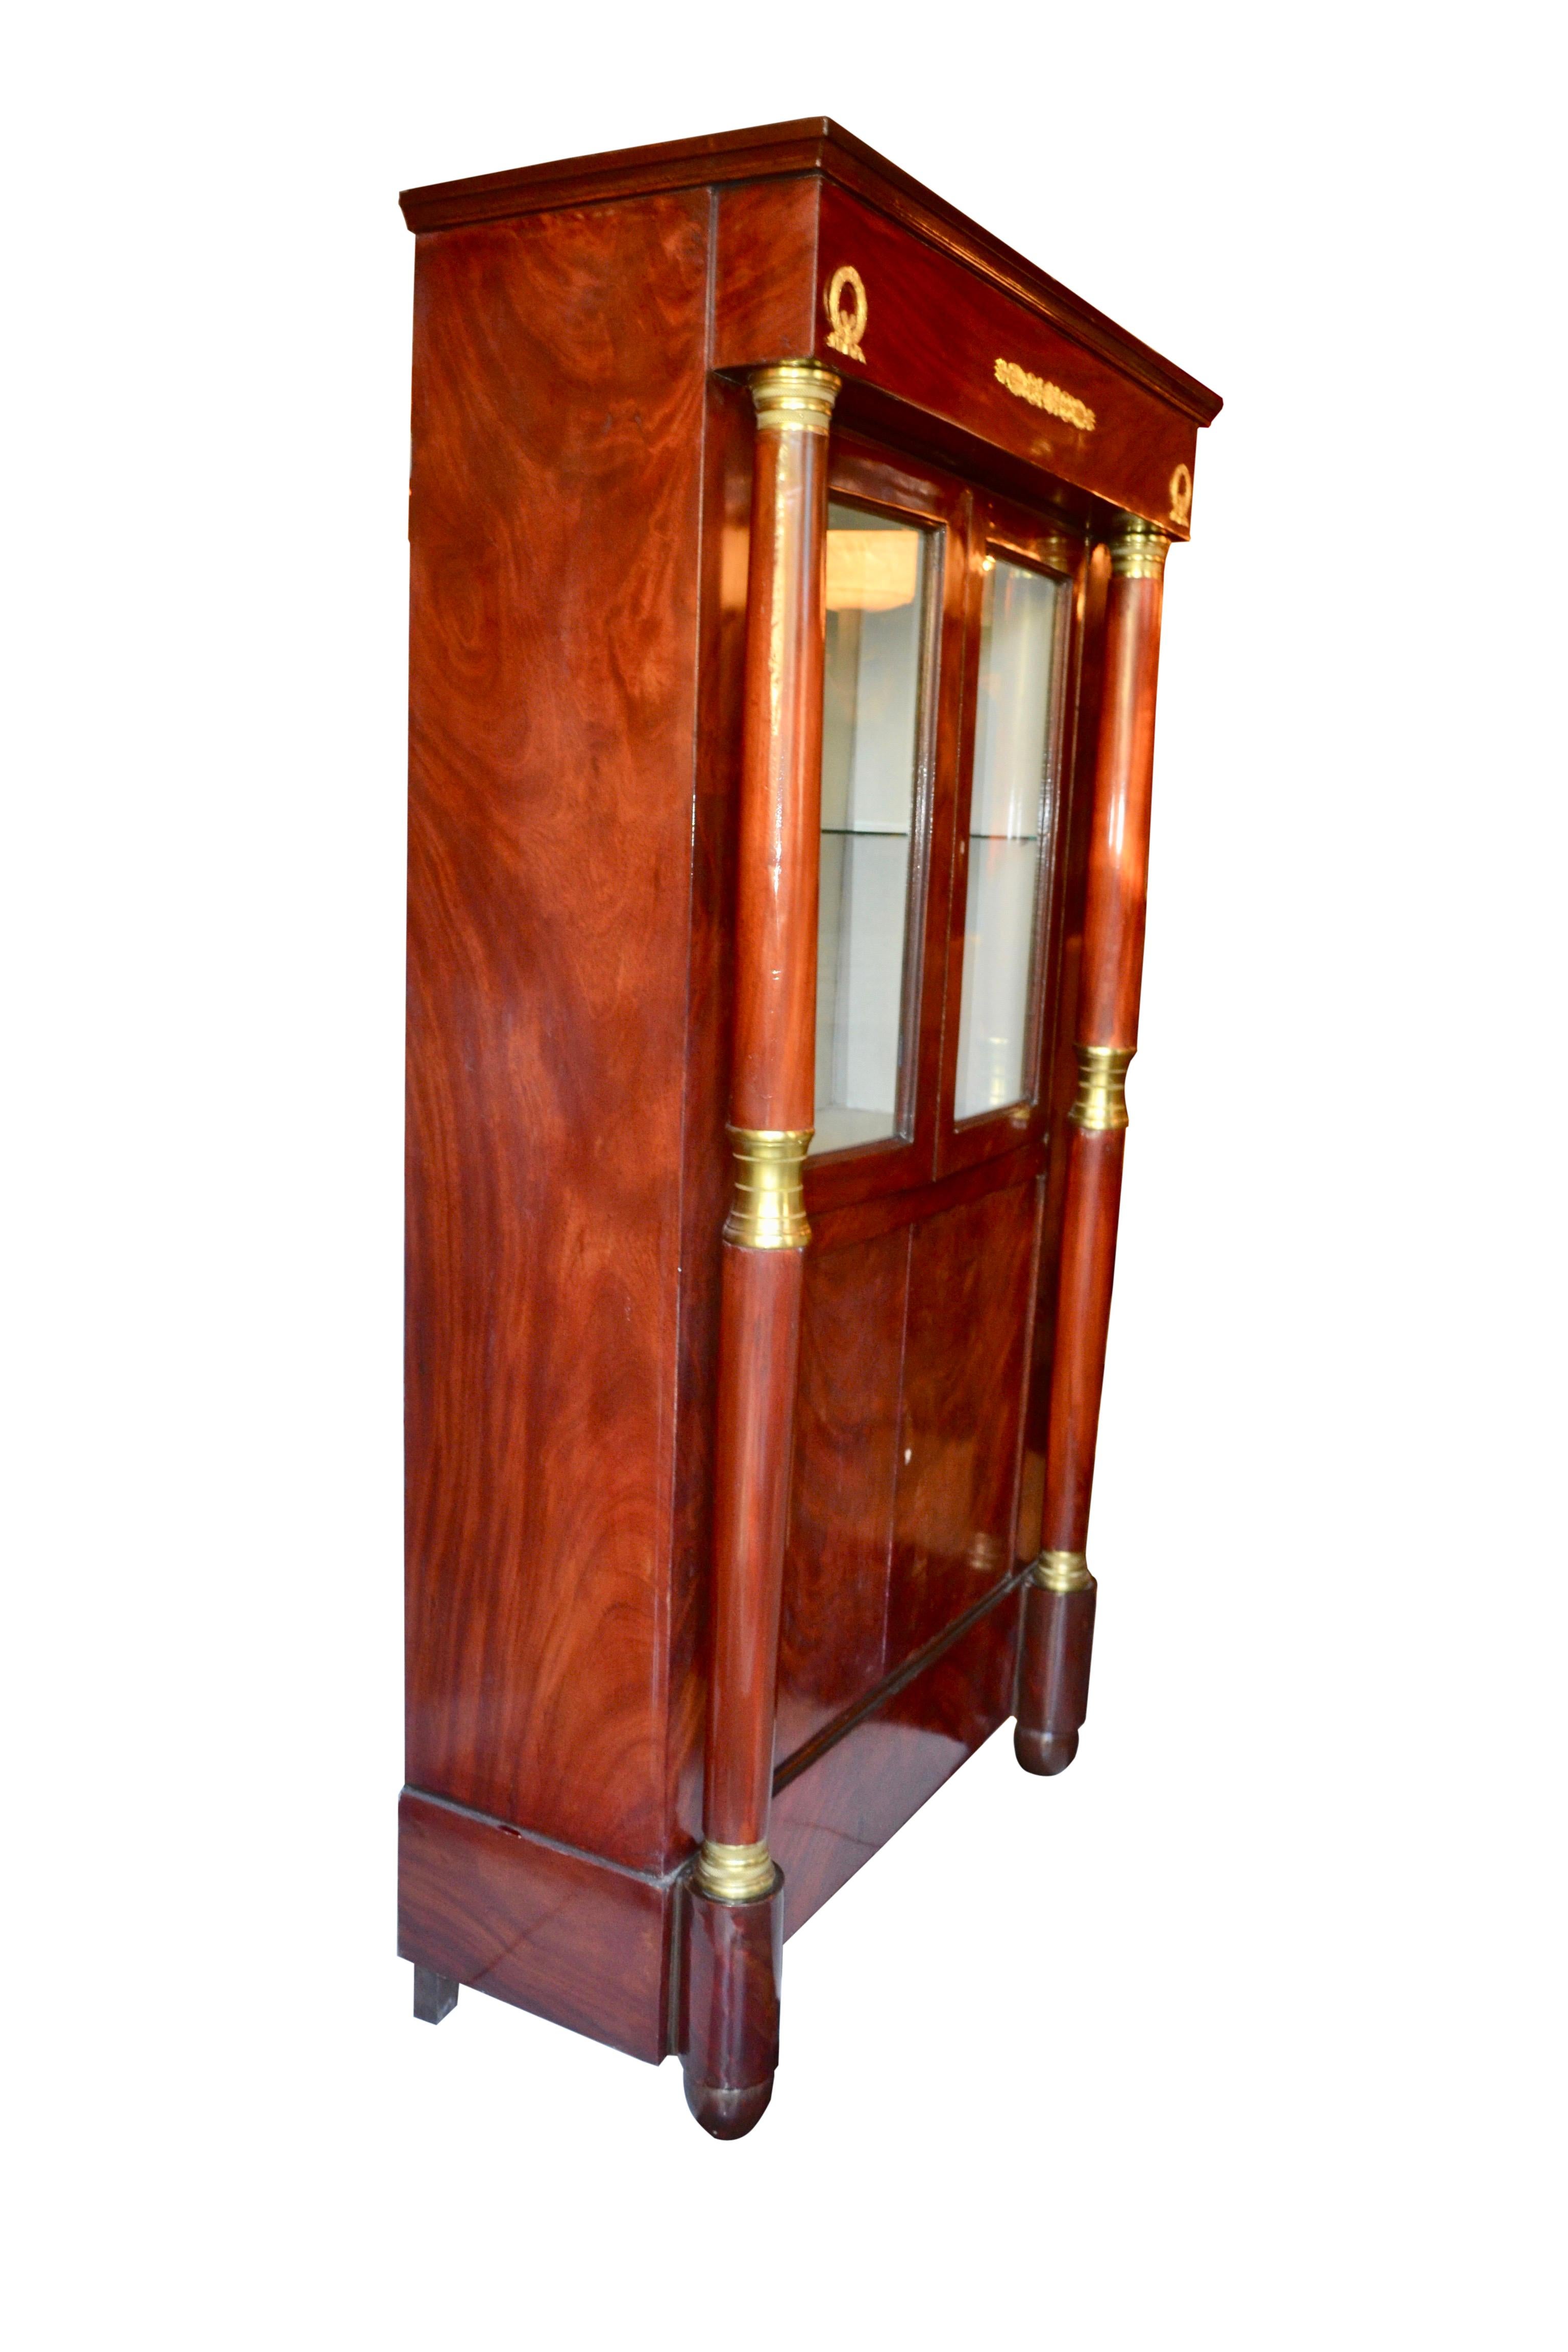 Empire Revival French Empire Style Mahogany and Gilt Bronze Bookcase / Display Cabinet For Sale